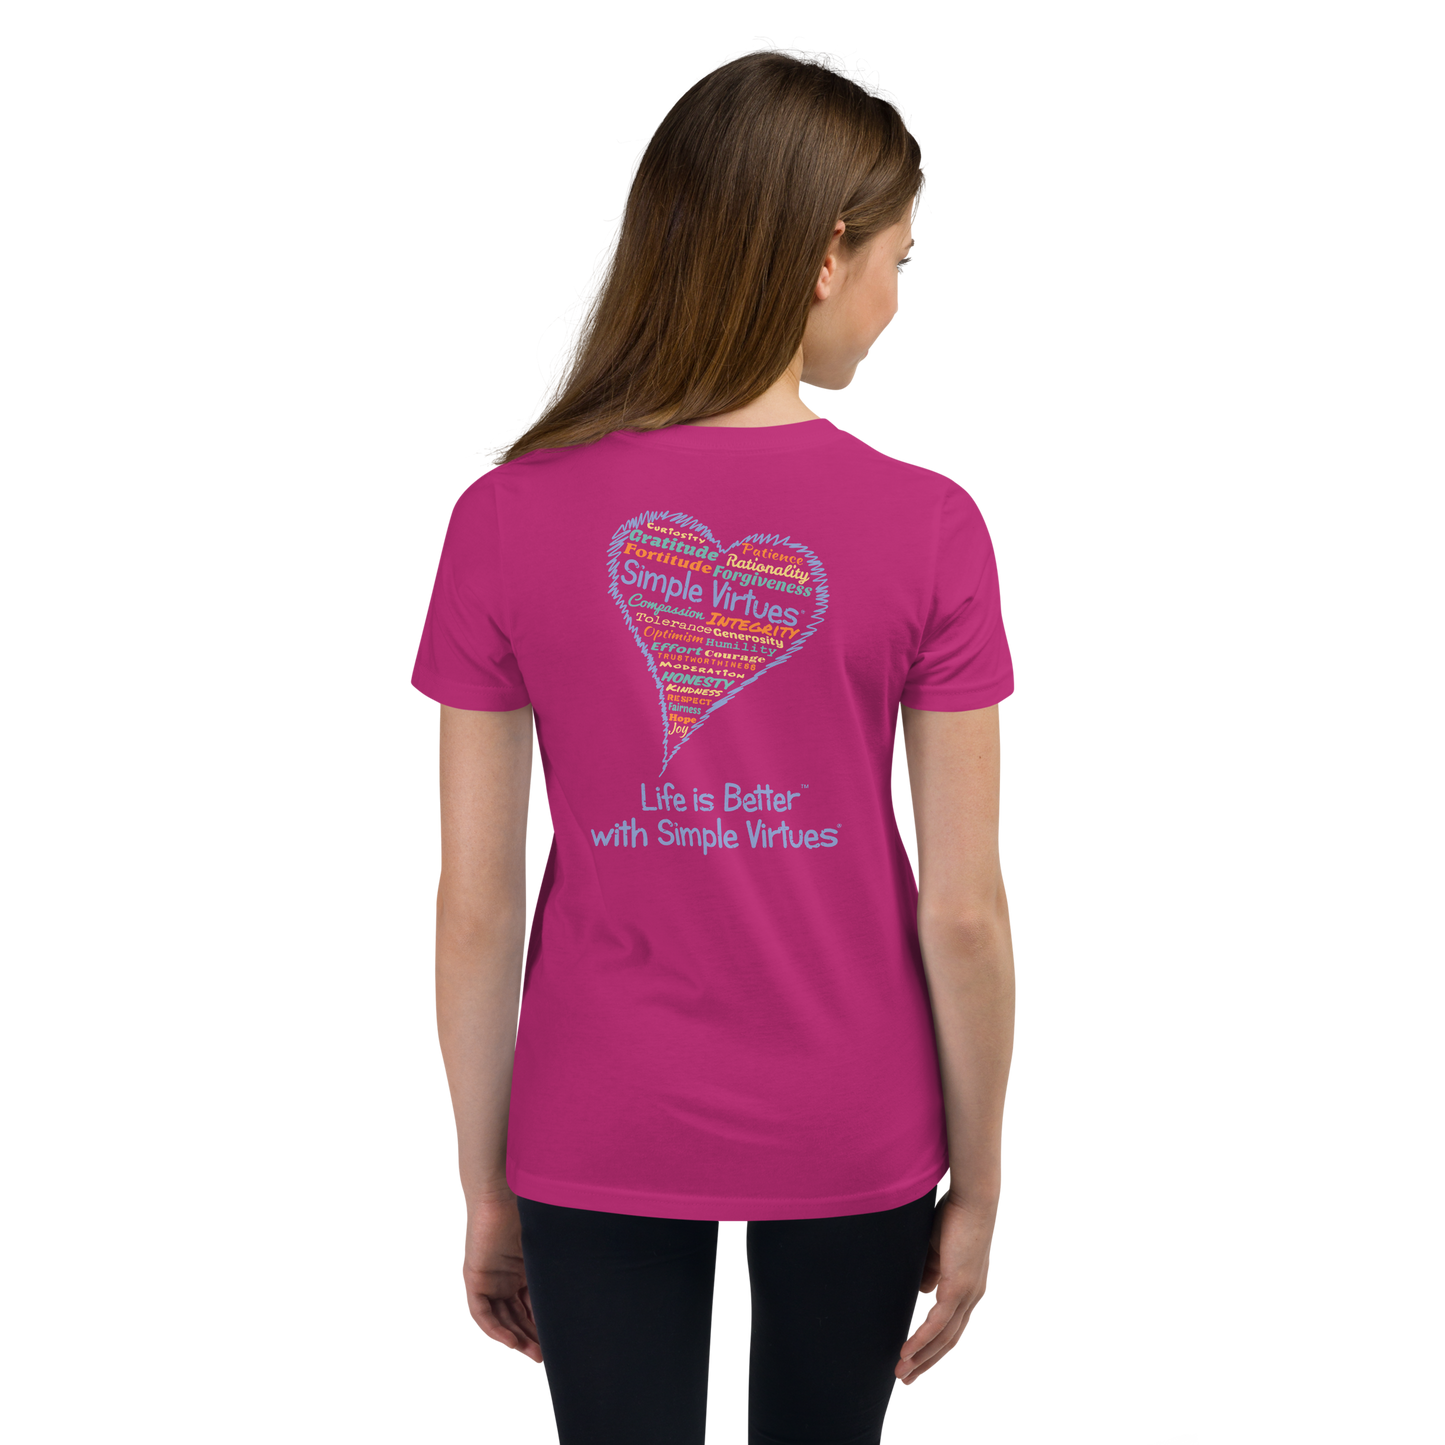 Berry Pink "Heart Full of Virtues" Youth Unisex Short Sleeve T-Shirt